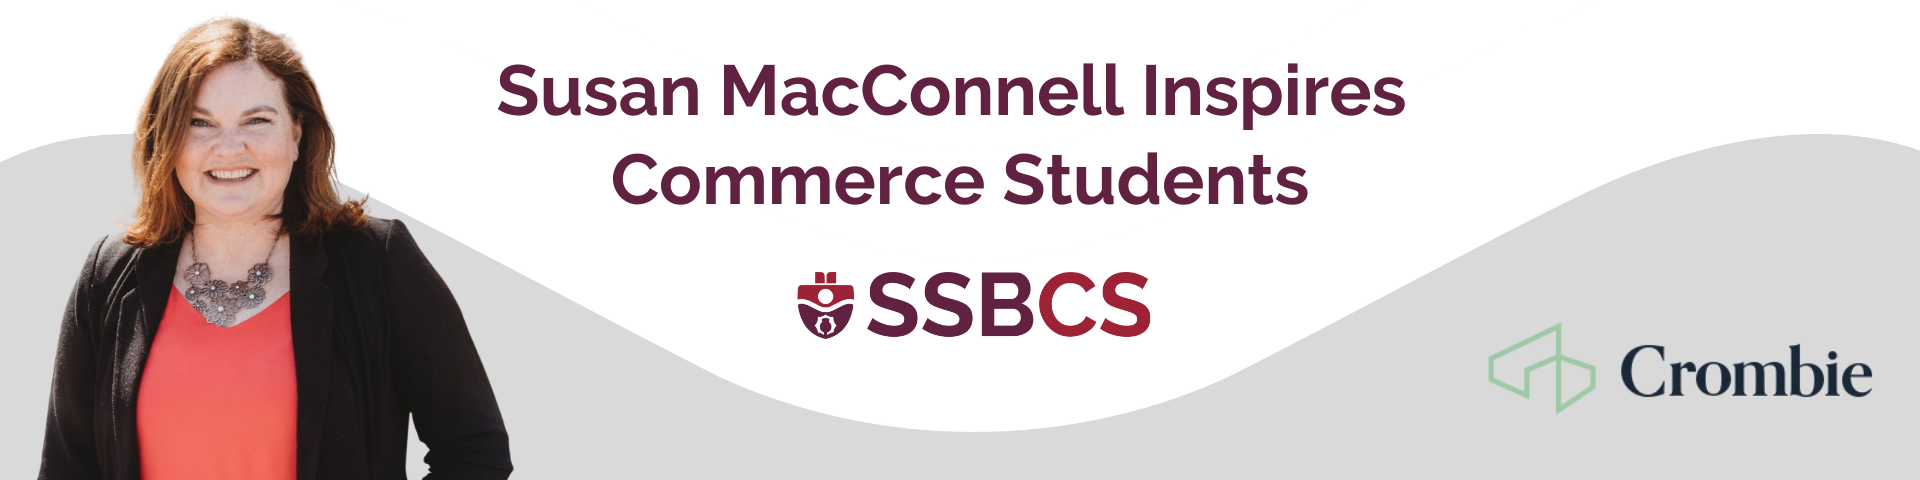 Featured image for “Susan MacConnell Inspires Commerce Students”